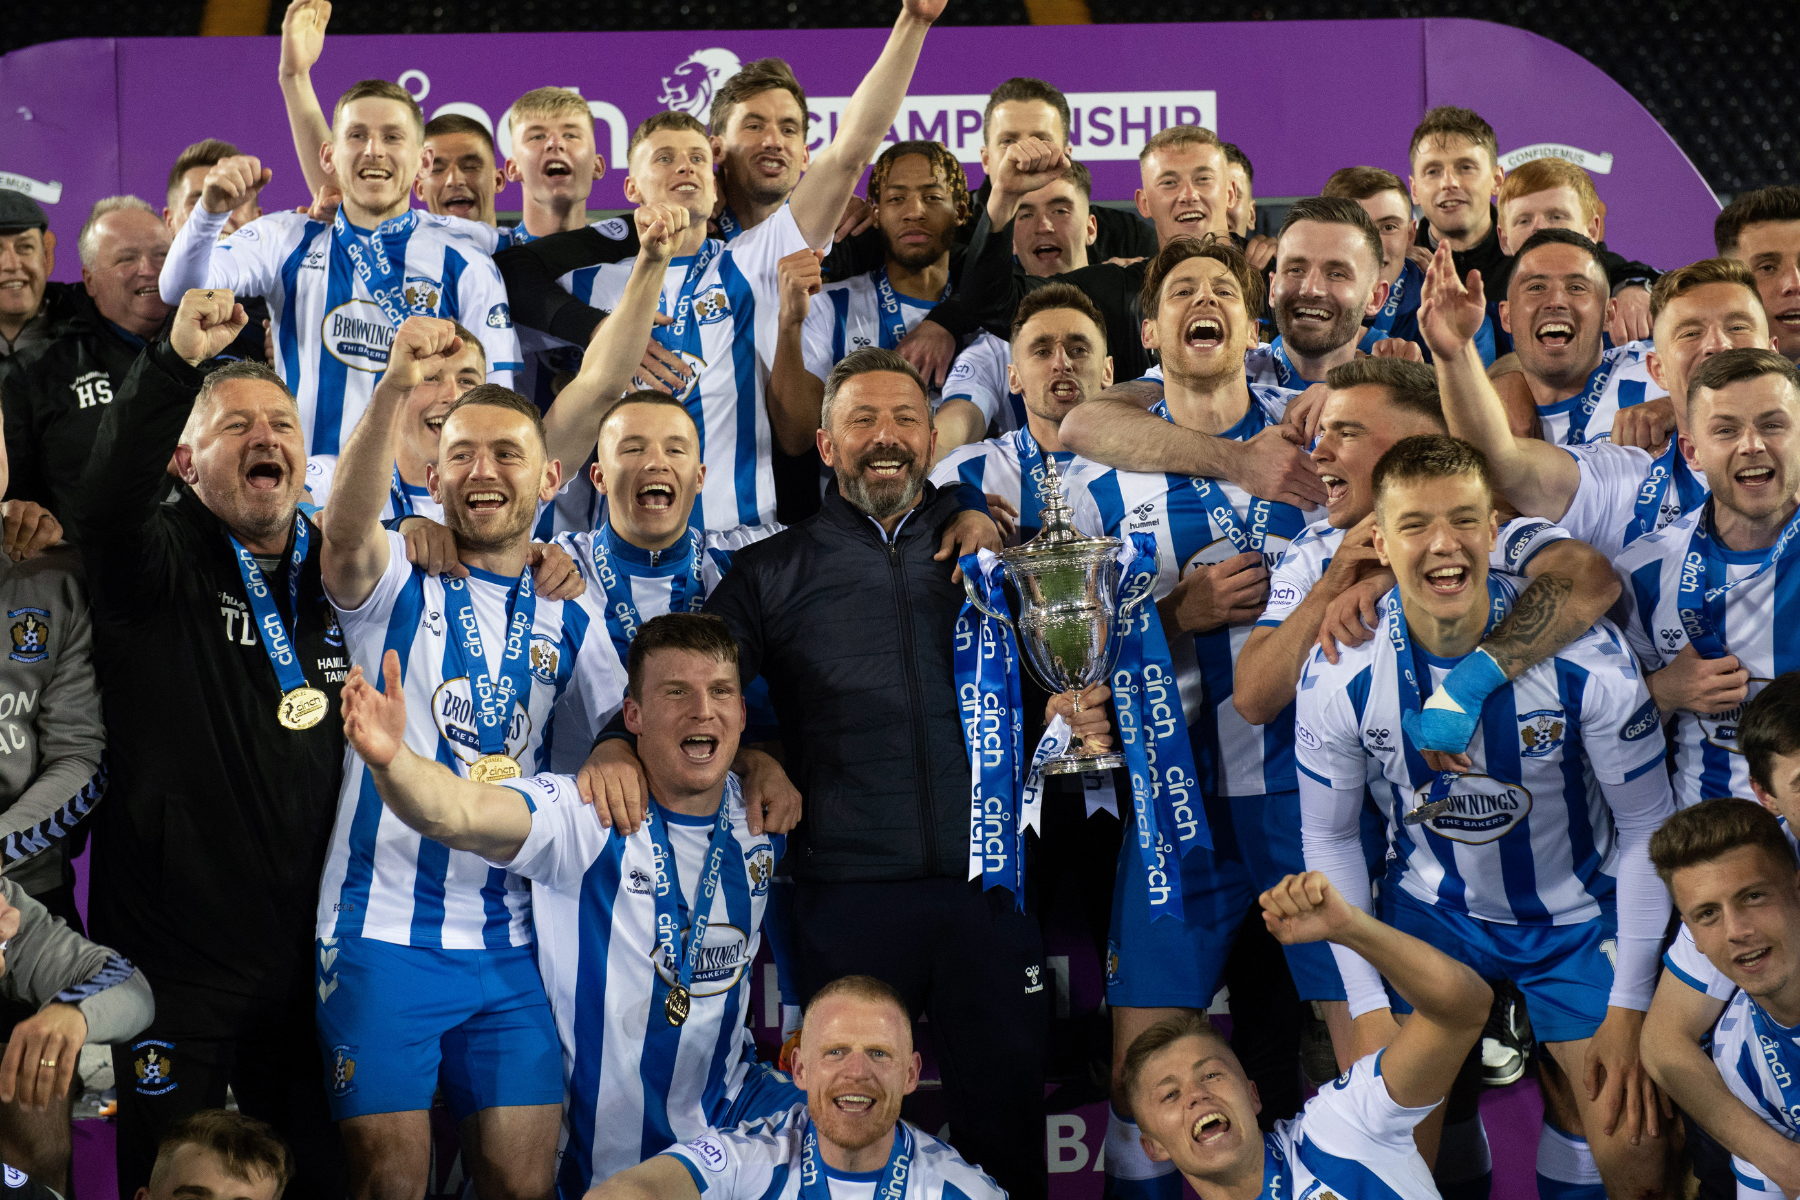 Kilmarnock should be aiming for at least top six next season, insists Andy McLaren